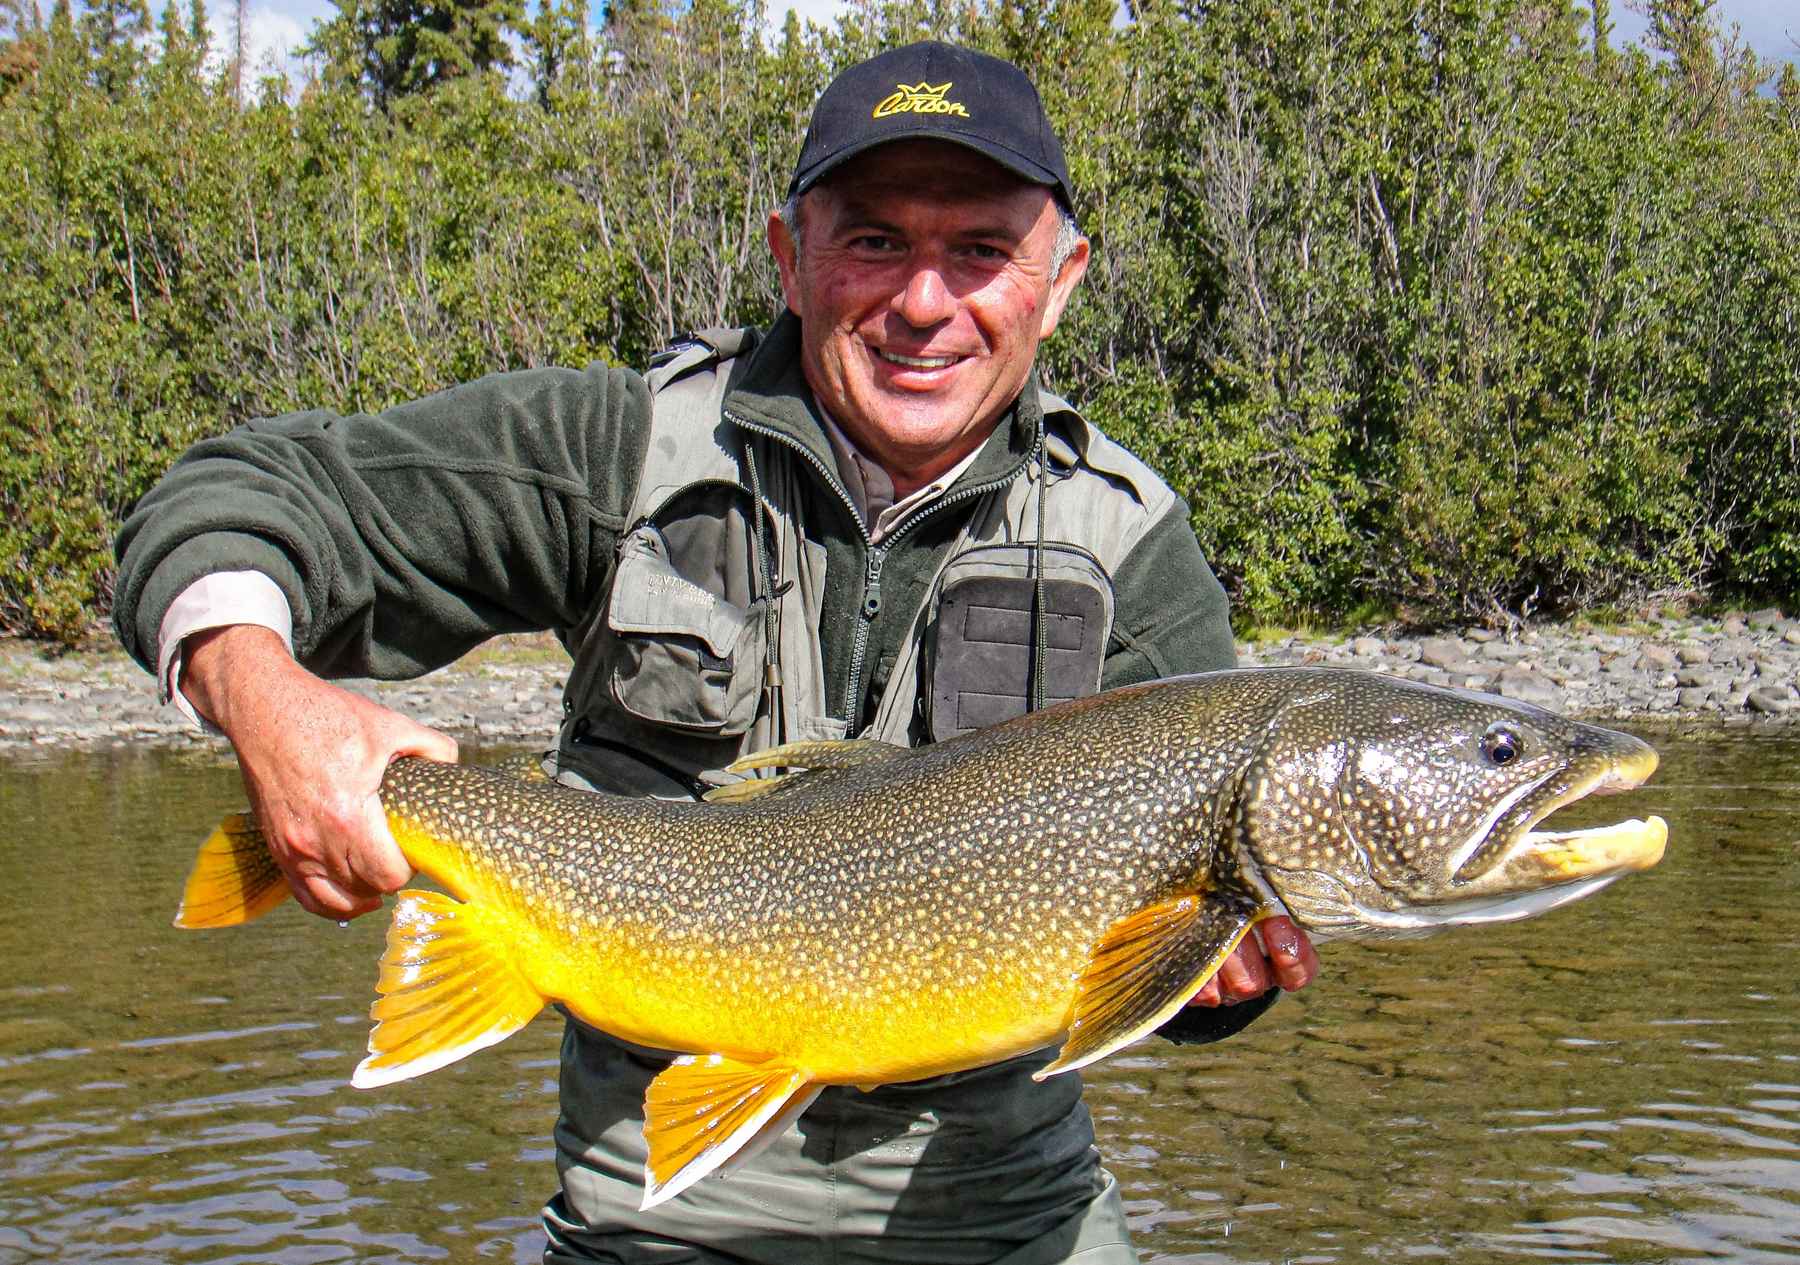 The Wonderful Brook Trout – Caribou Gear Outdoor Equipment Company